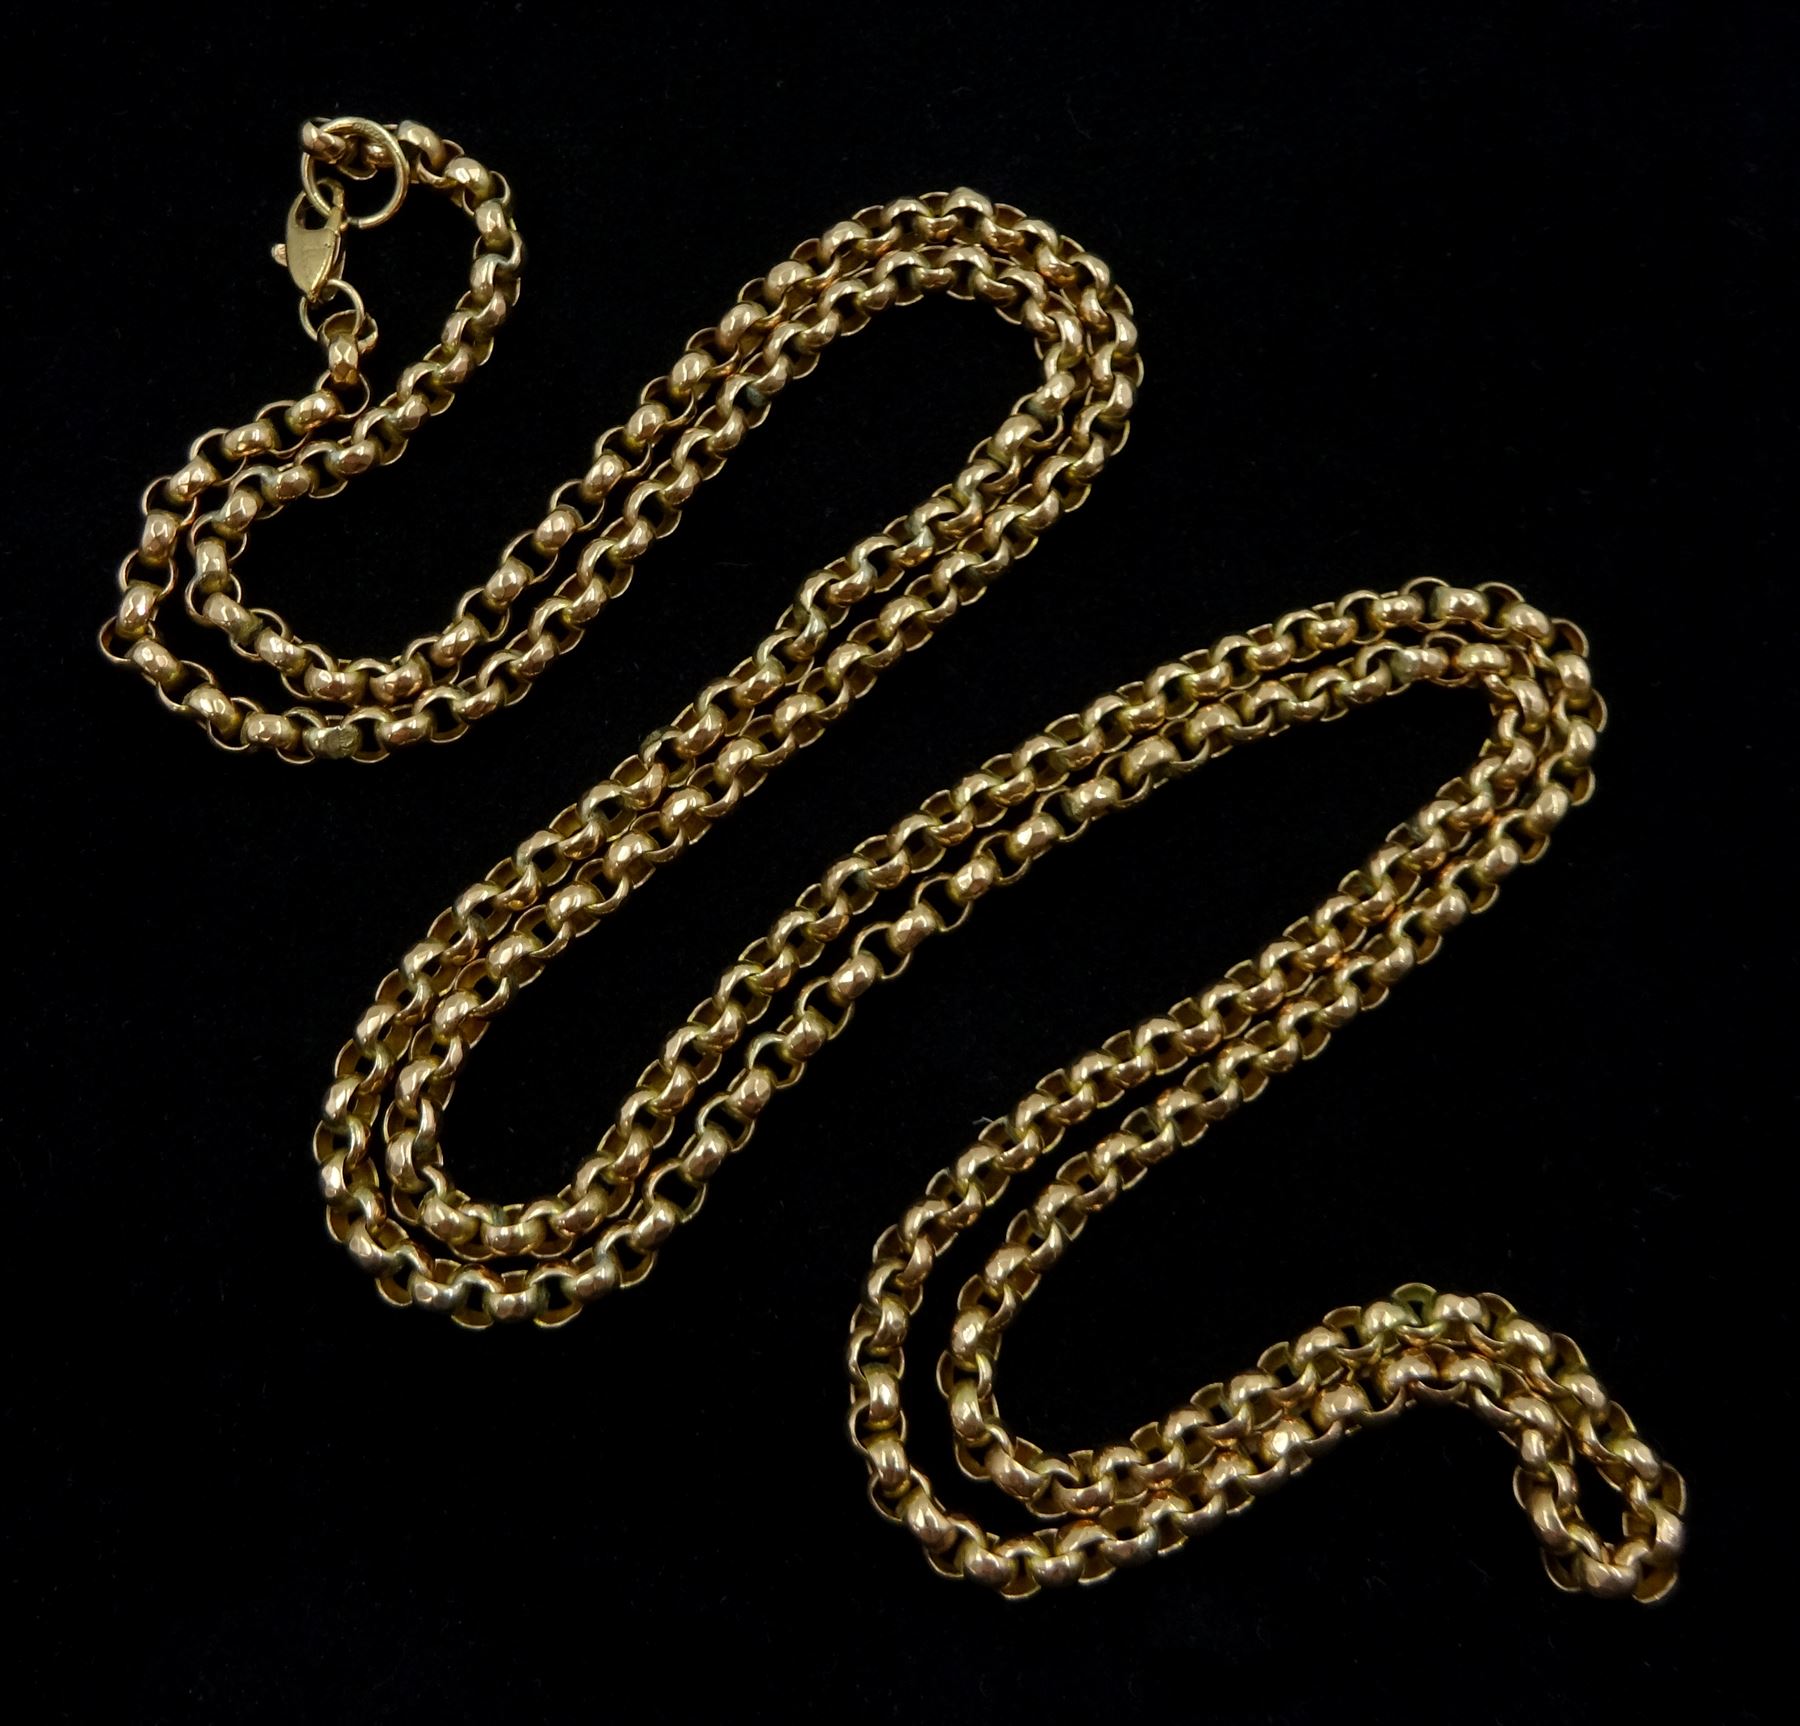 9ct rose gold cable link chain necklace - Image 2 of 2